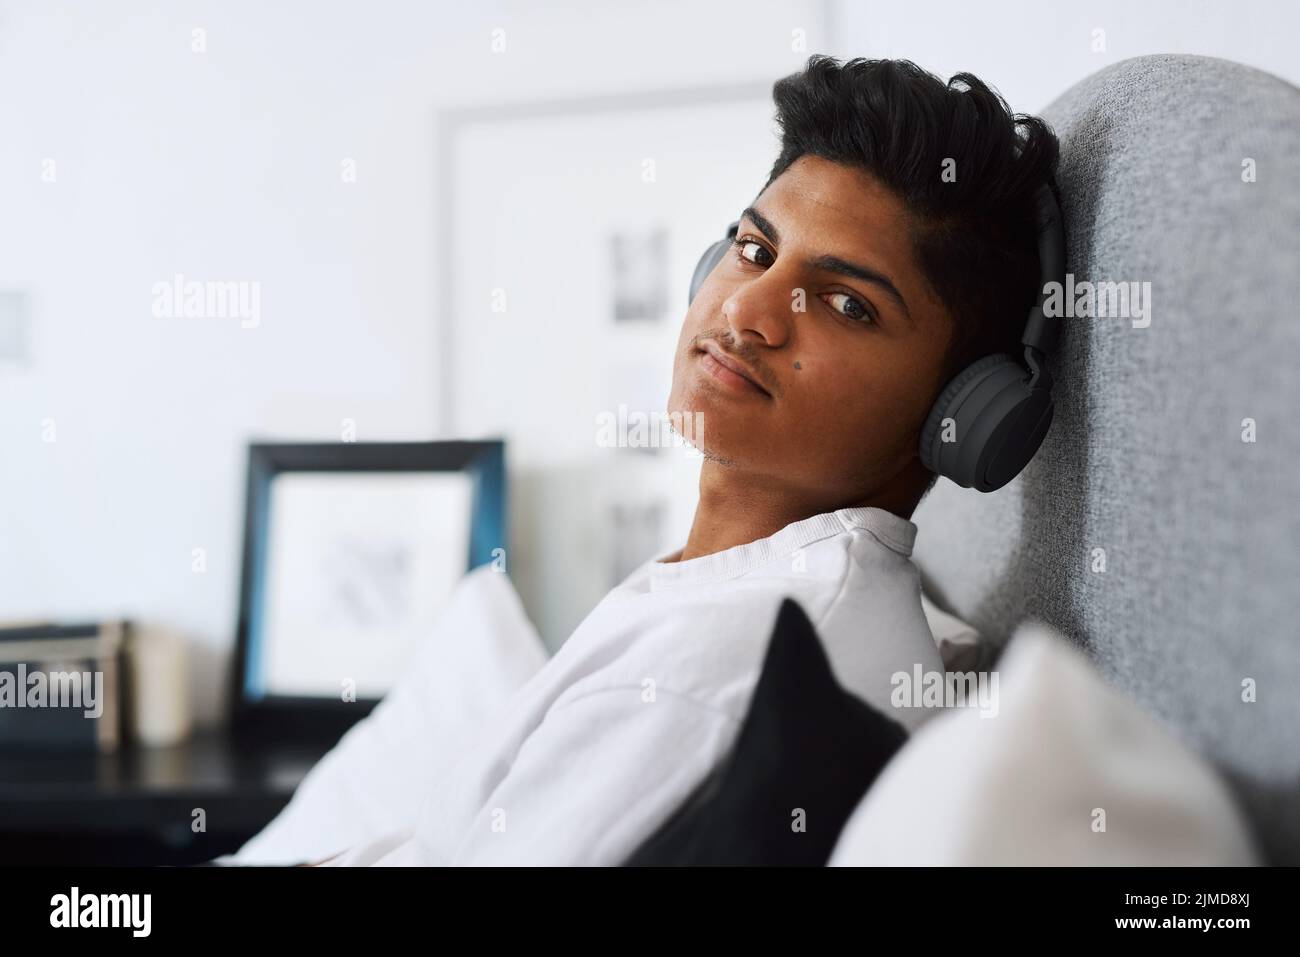 My choice of music is based on my mood. a young man listening to music through his headphones while relaxing at home. Stock Photo